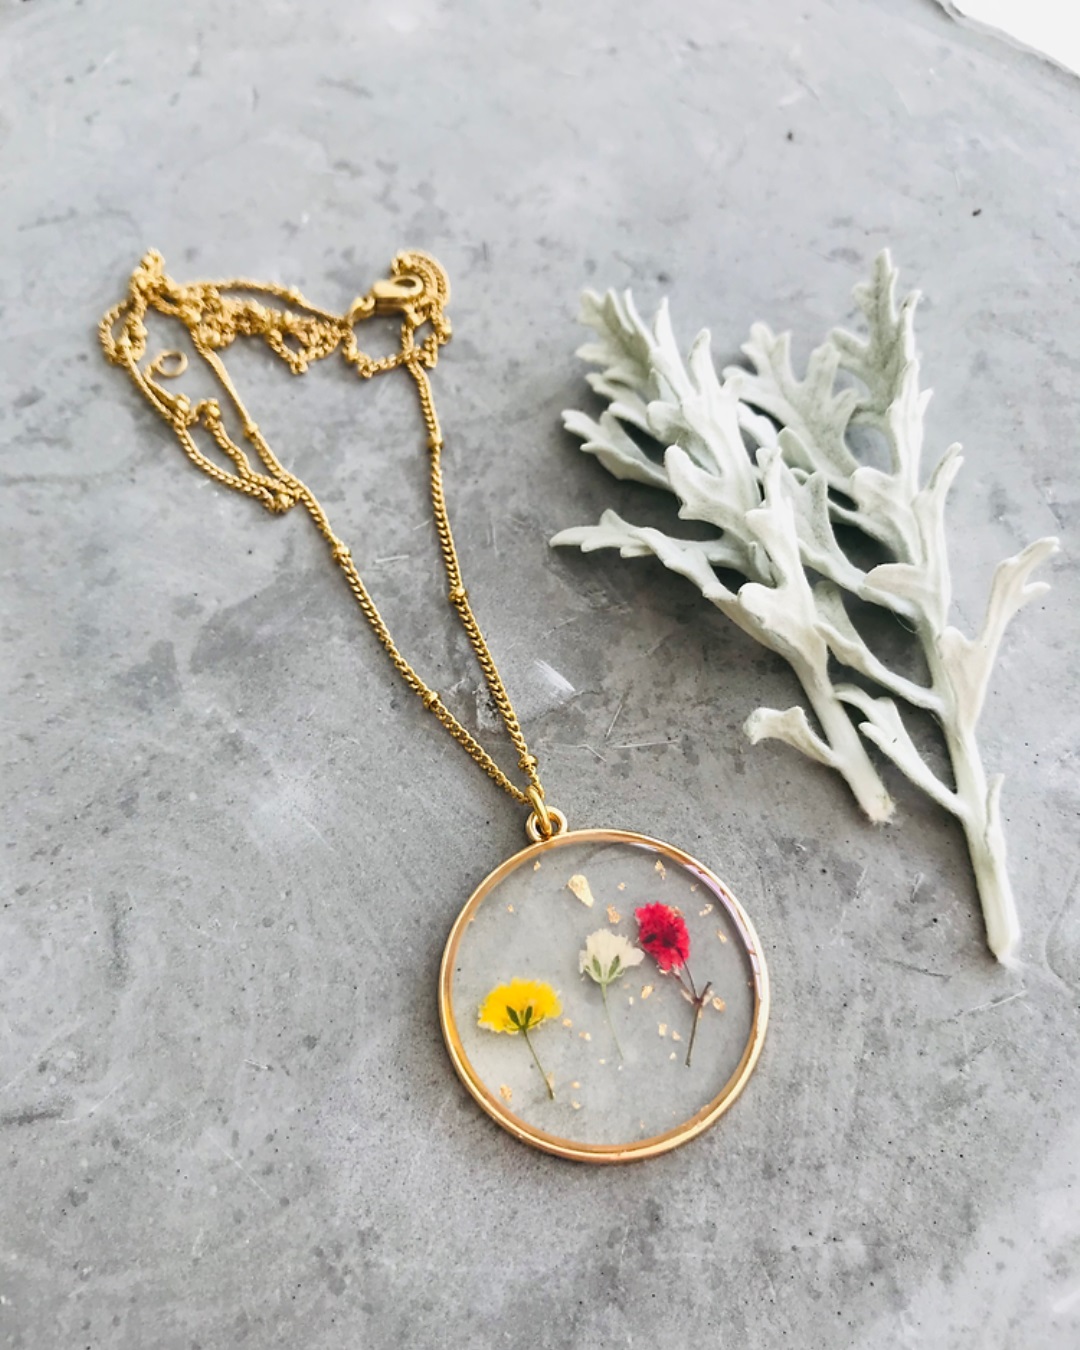 Pressed floral necklace with gold chain on grey stone